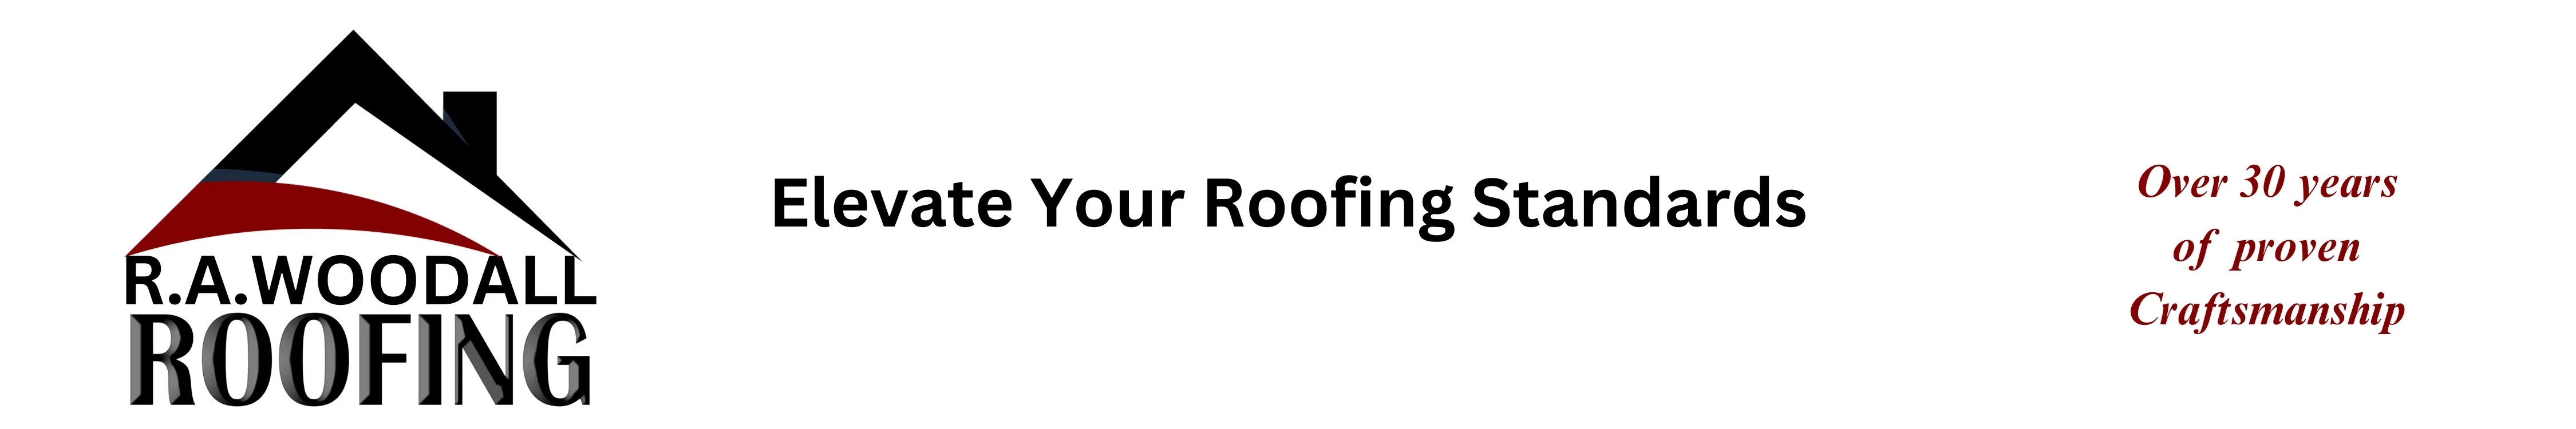 R.A. Woodall Roofing Logo